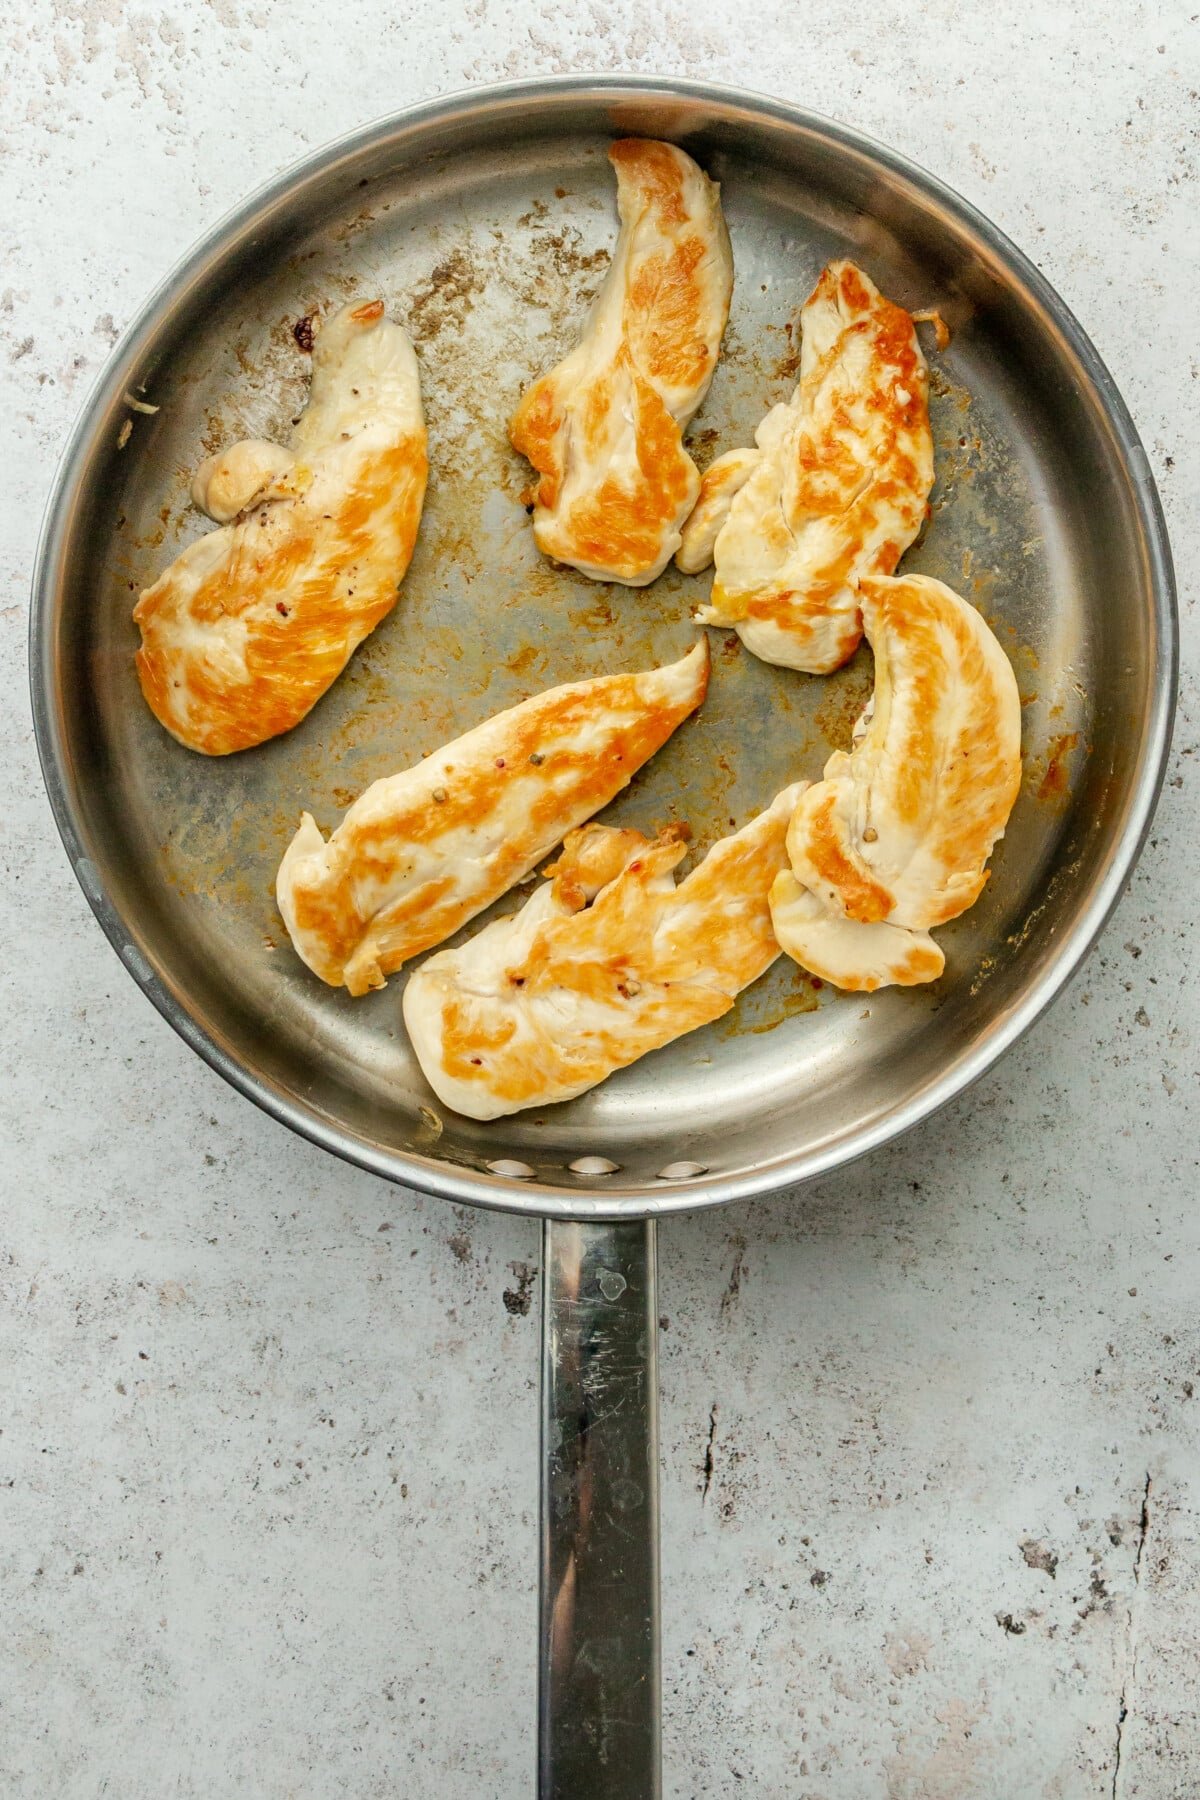 Golden chicken tenders sit in a stainless steel frying pan on a light grey surface.